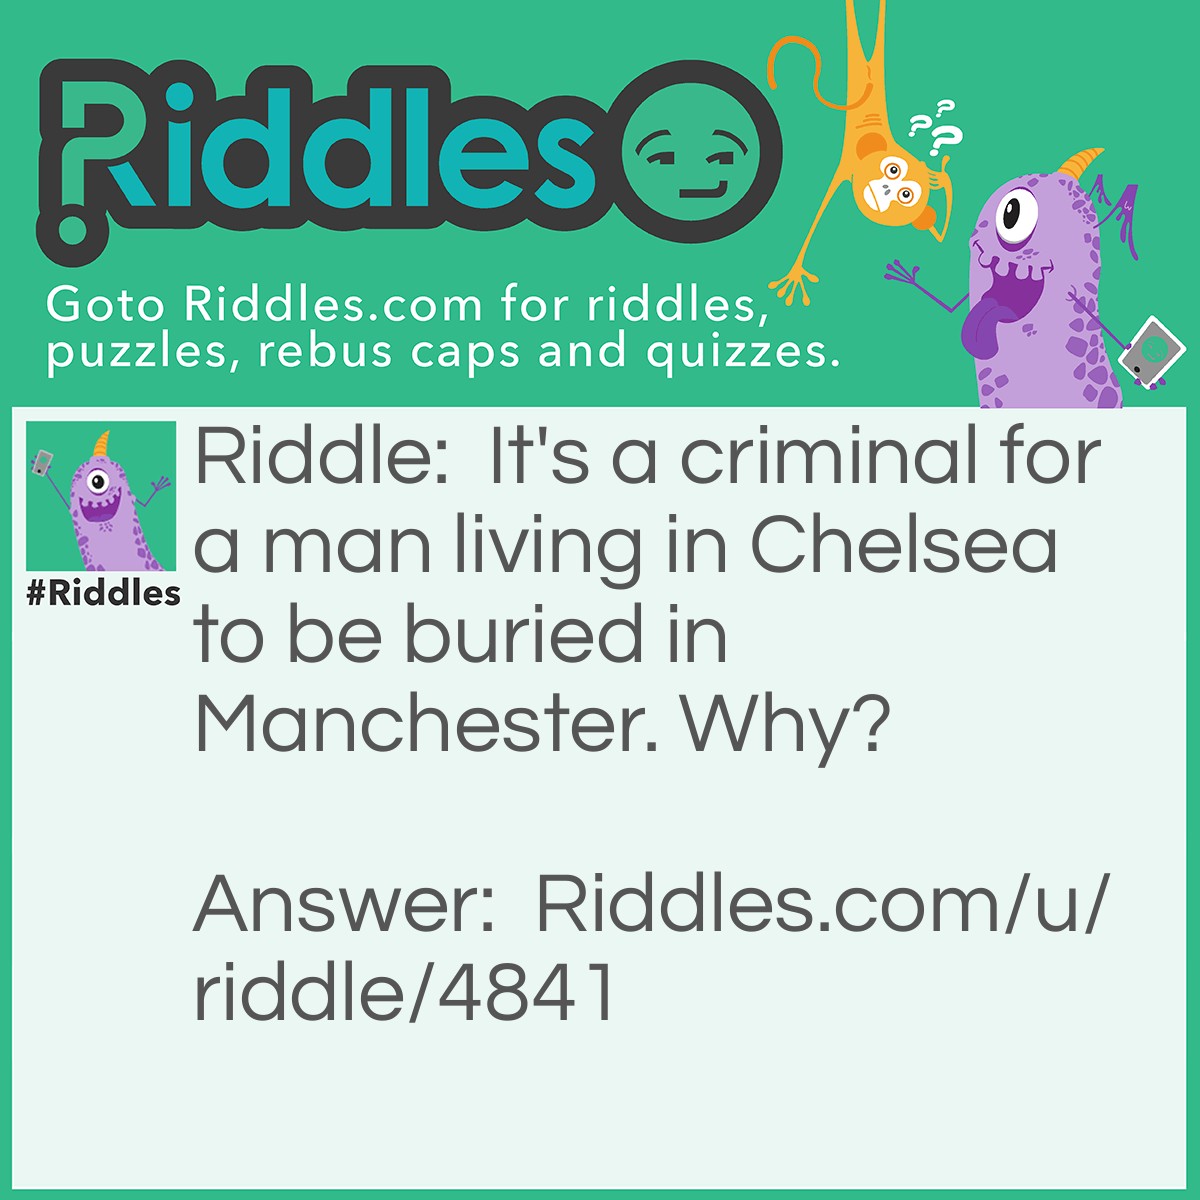 Riddle: It's a criminal for a man living in Chelsea to be buried in Manchester. Why? Answer: He is living.